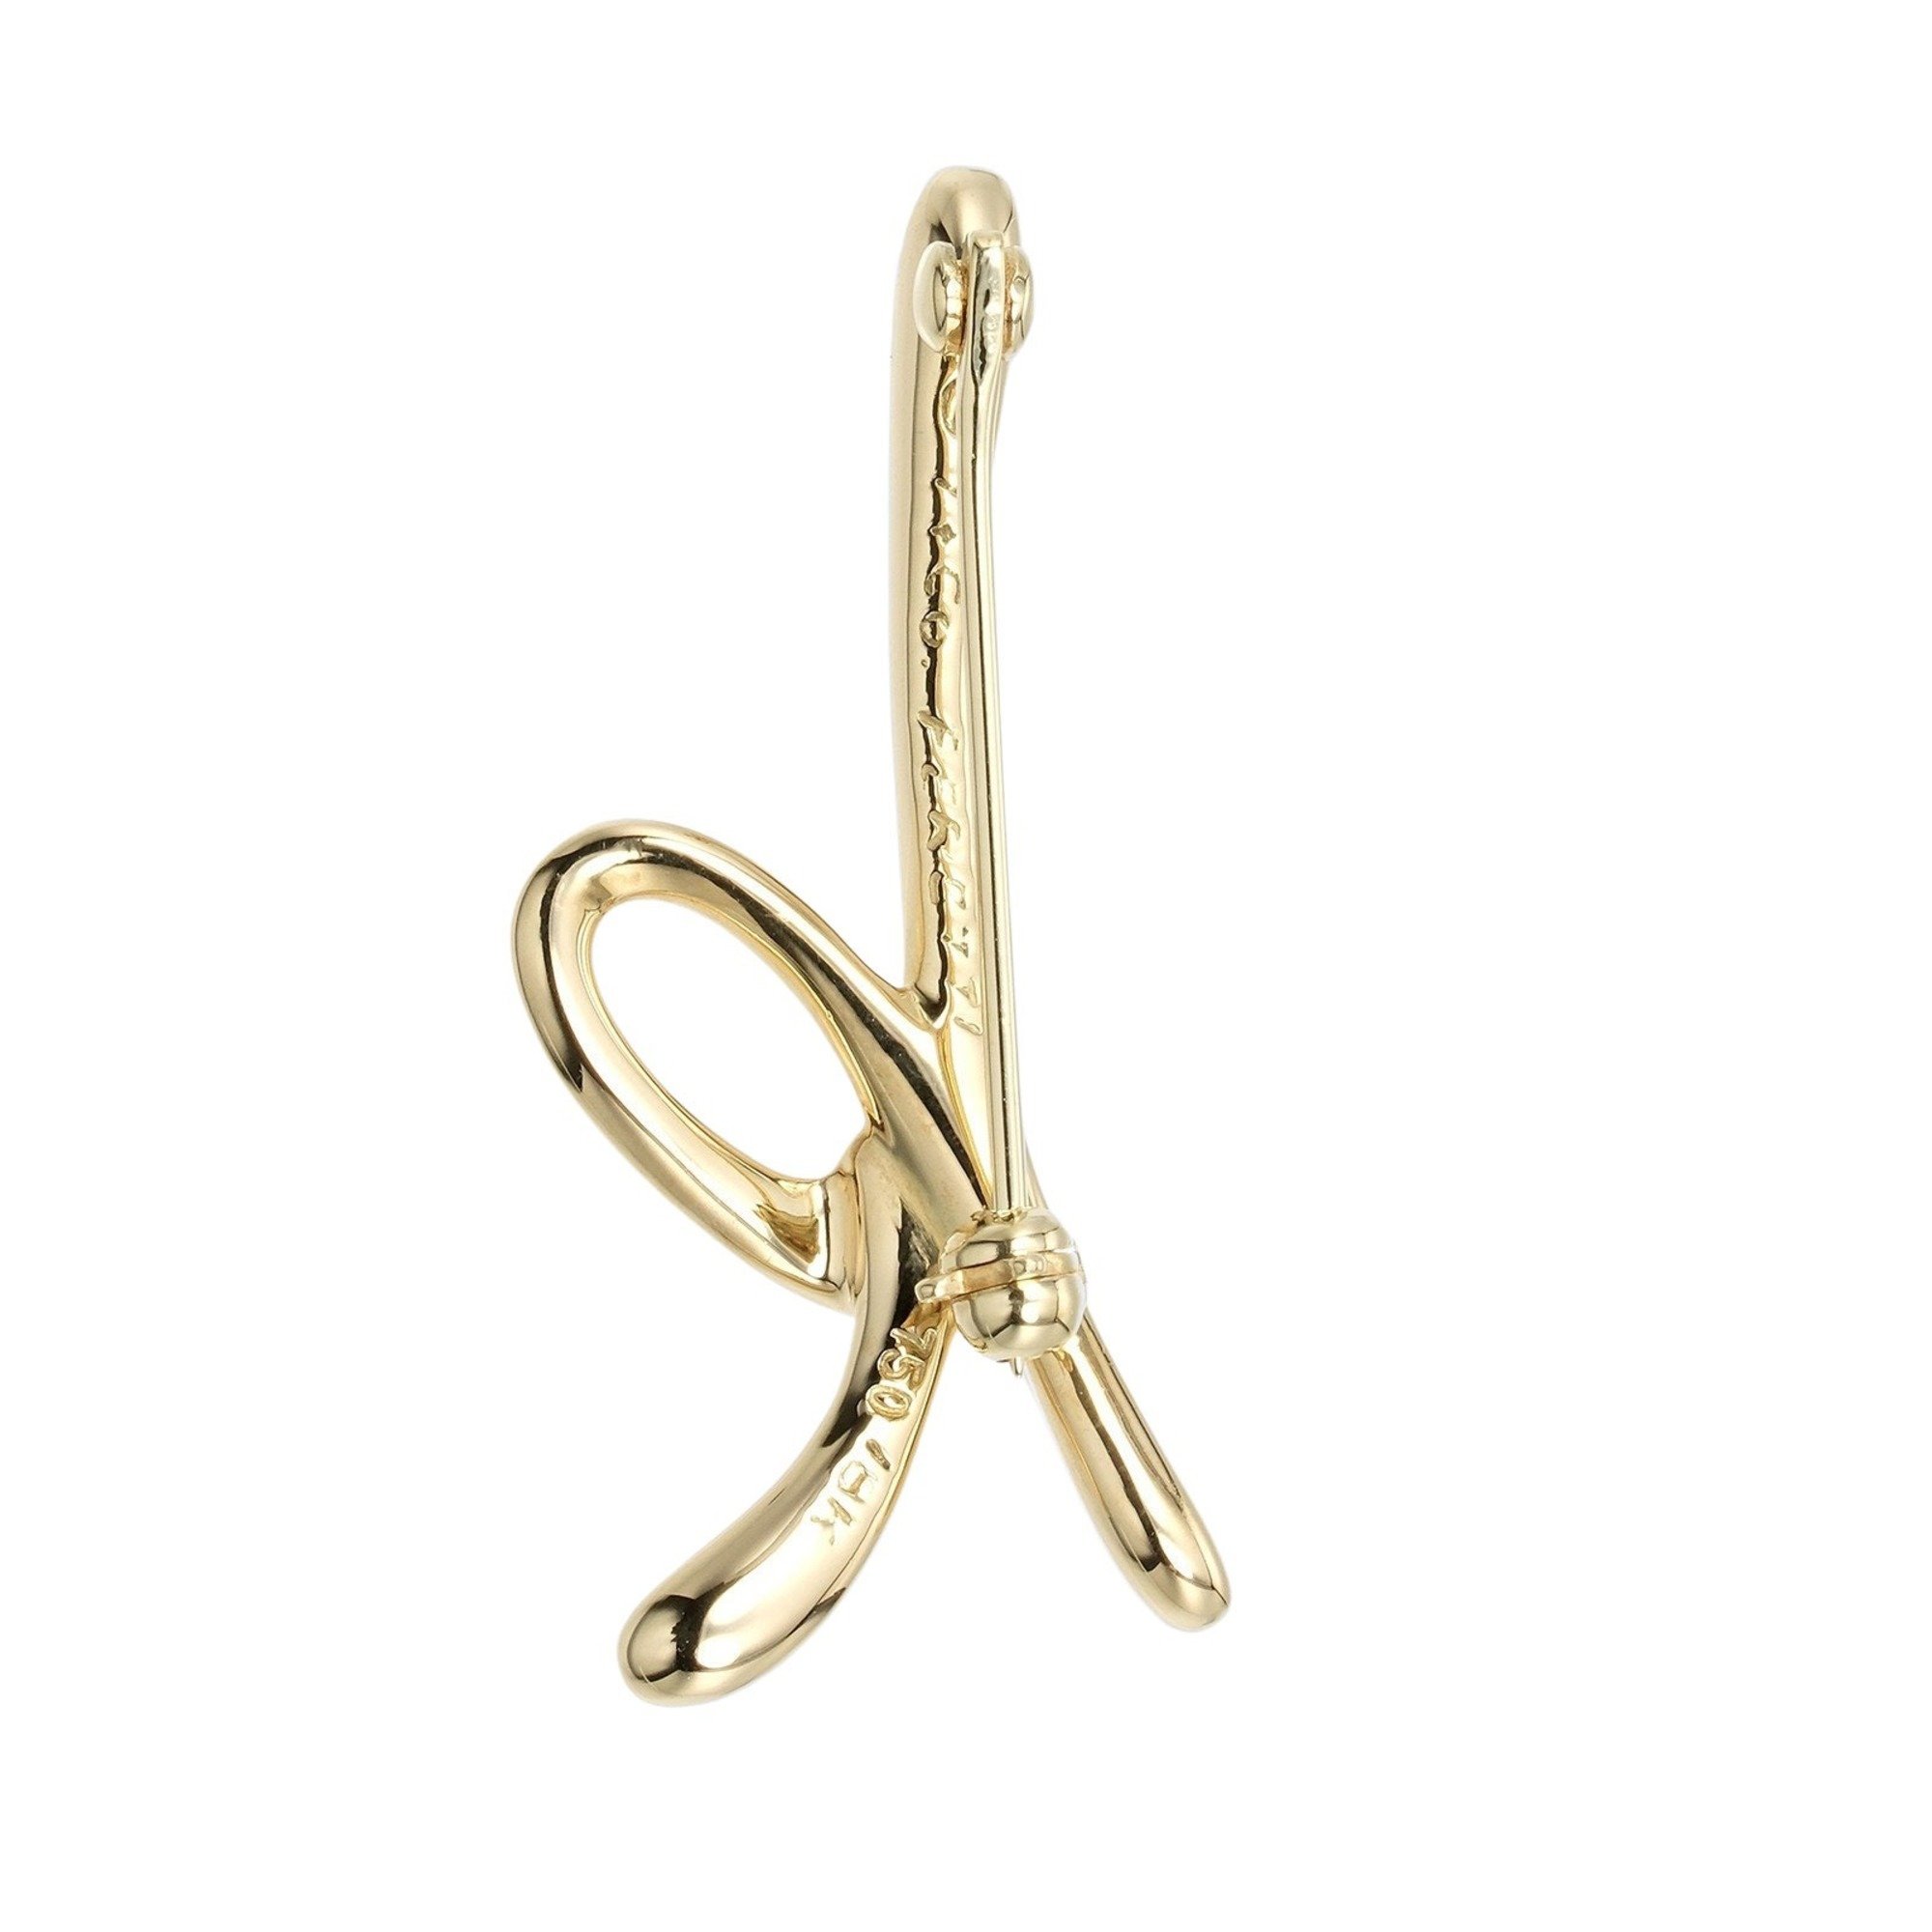 Tiffany TIFFANY&Co. Letter k brooch initial K18 YG yellow gold approximately 5.44g